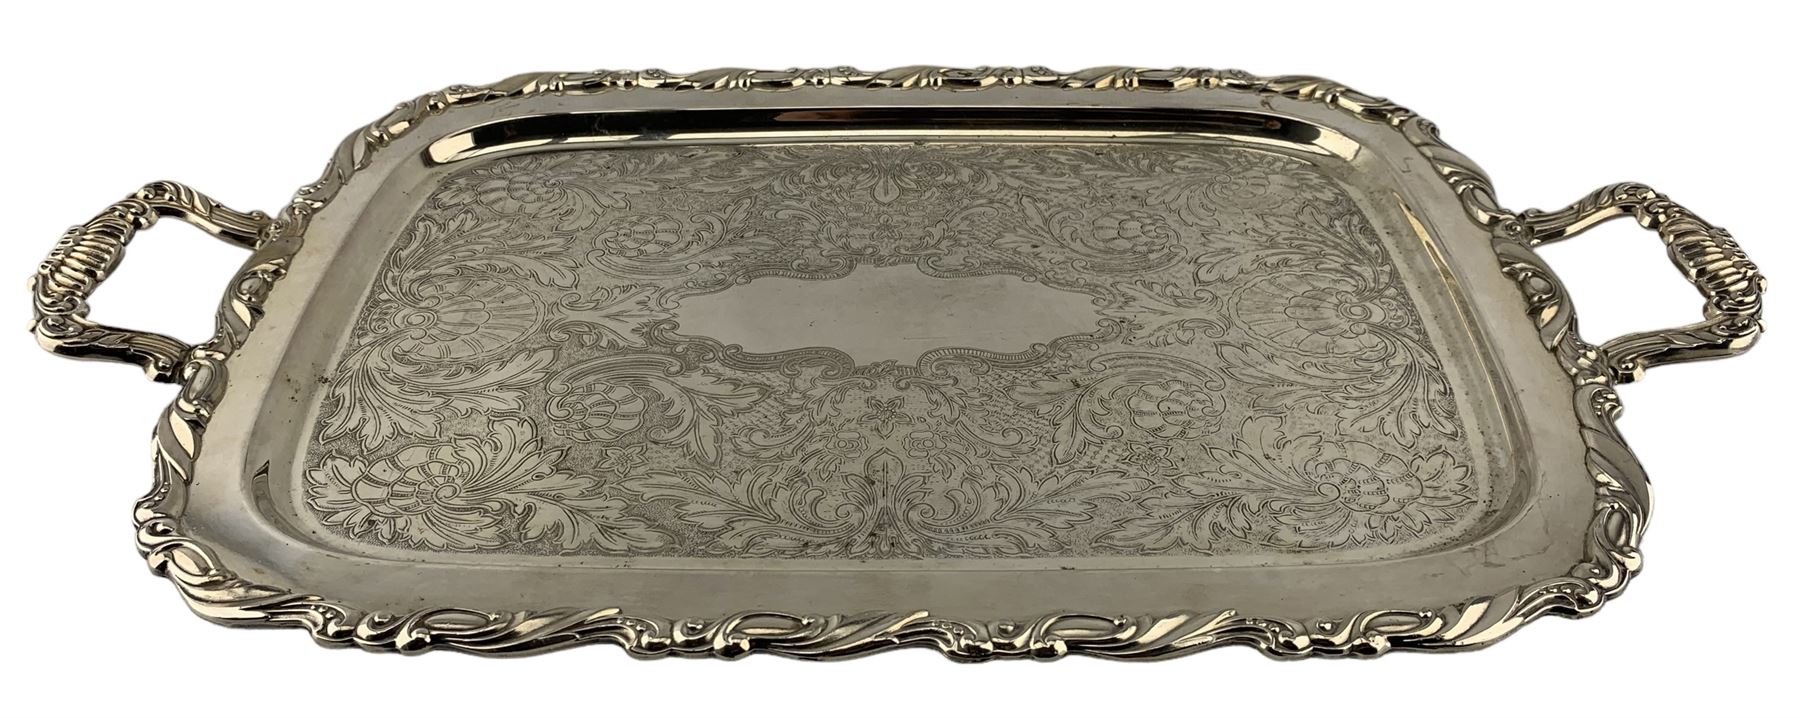 Oneida silver-plated twin handled tea tray with floral engraved decoration and scroll moulded border - Image 3 of 3